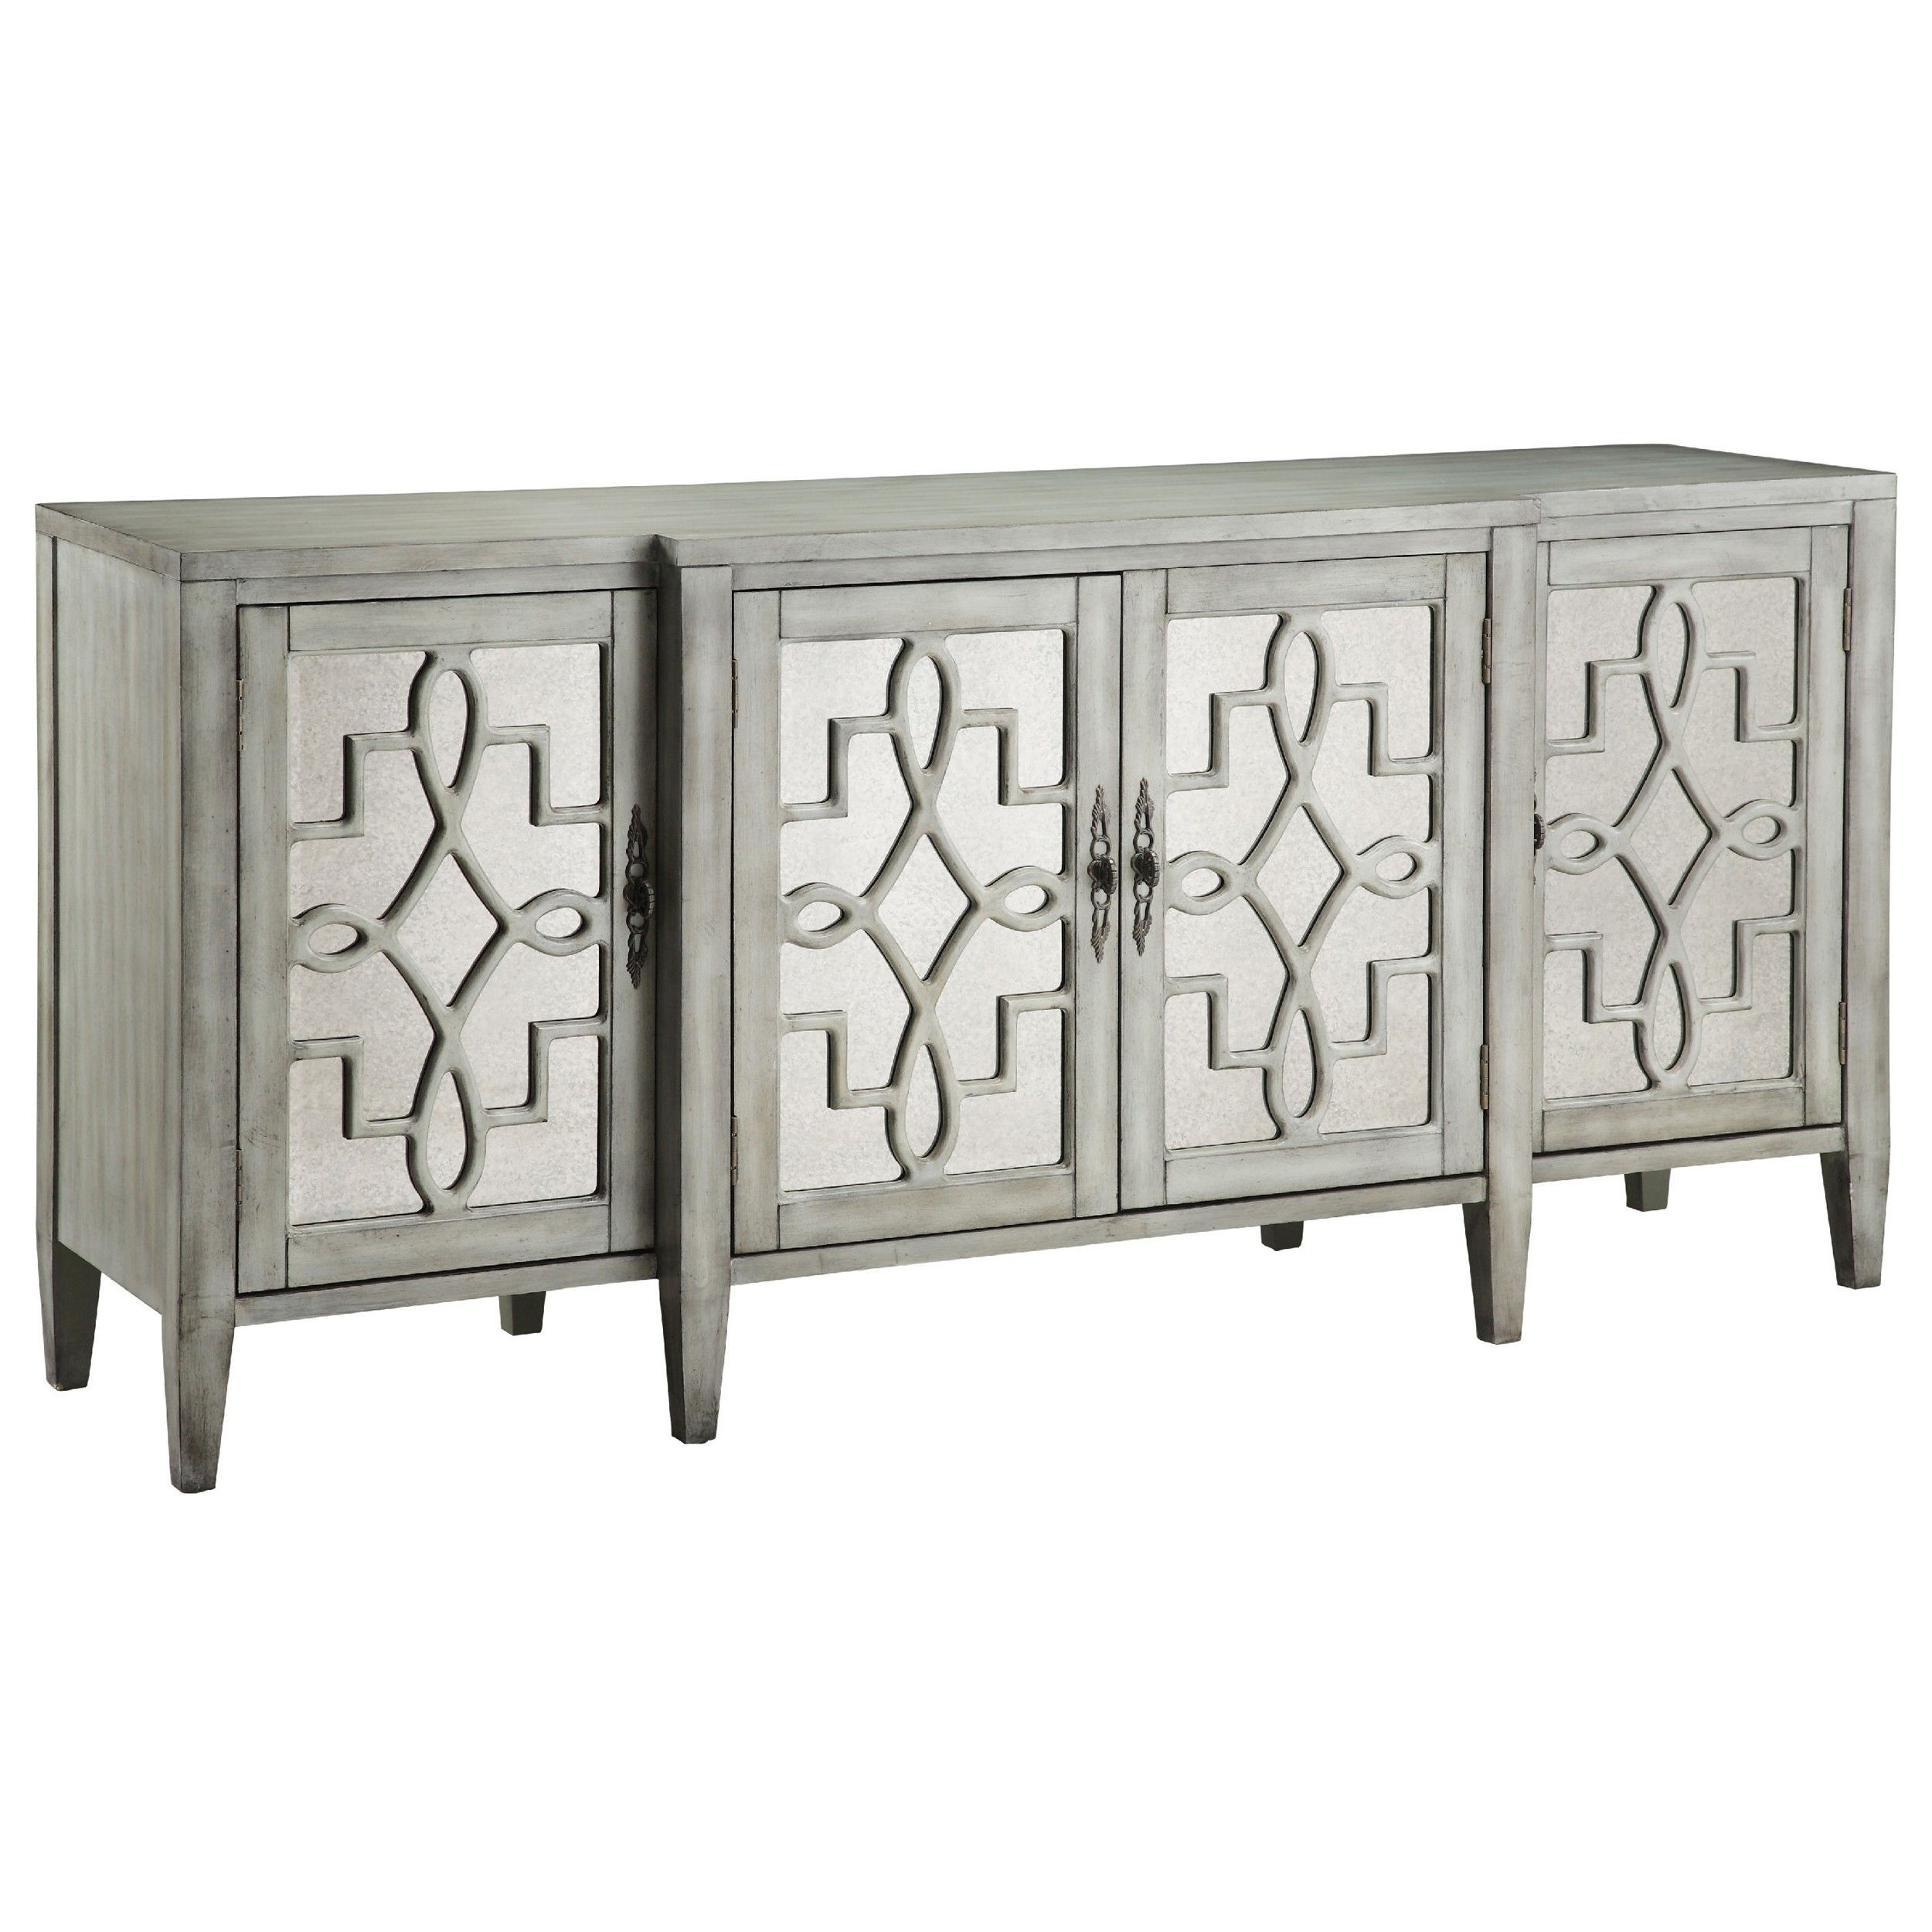 Isabelle Credenza | Furnishings | Pinterest | Credenza, Sideboard In Most Recent 2 Door Mirror Front Sideboards (Photo 3 of 20)